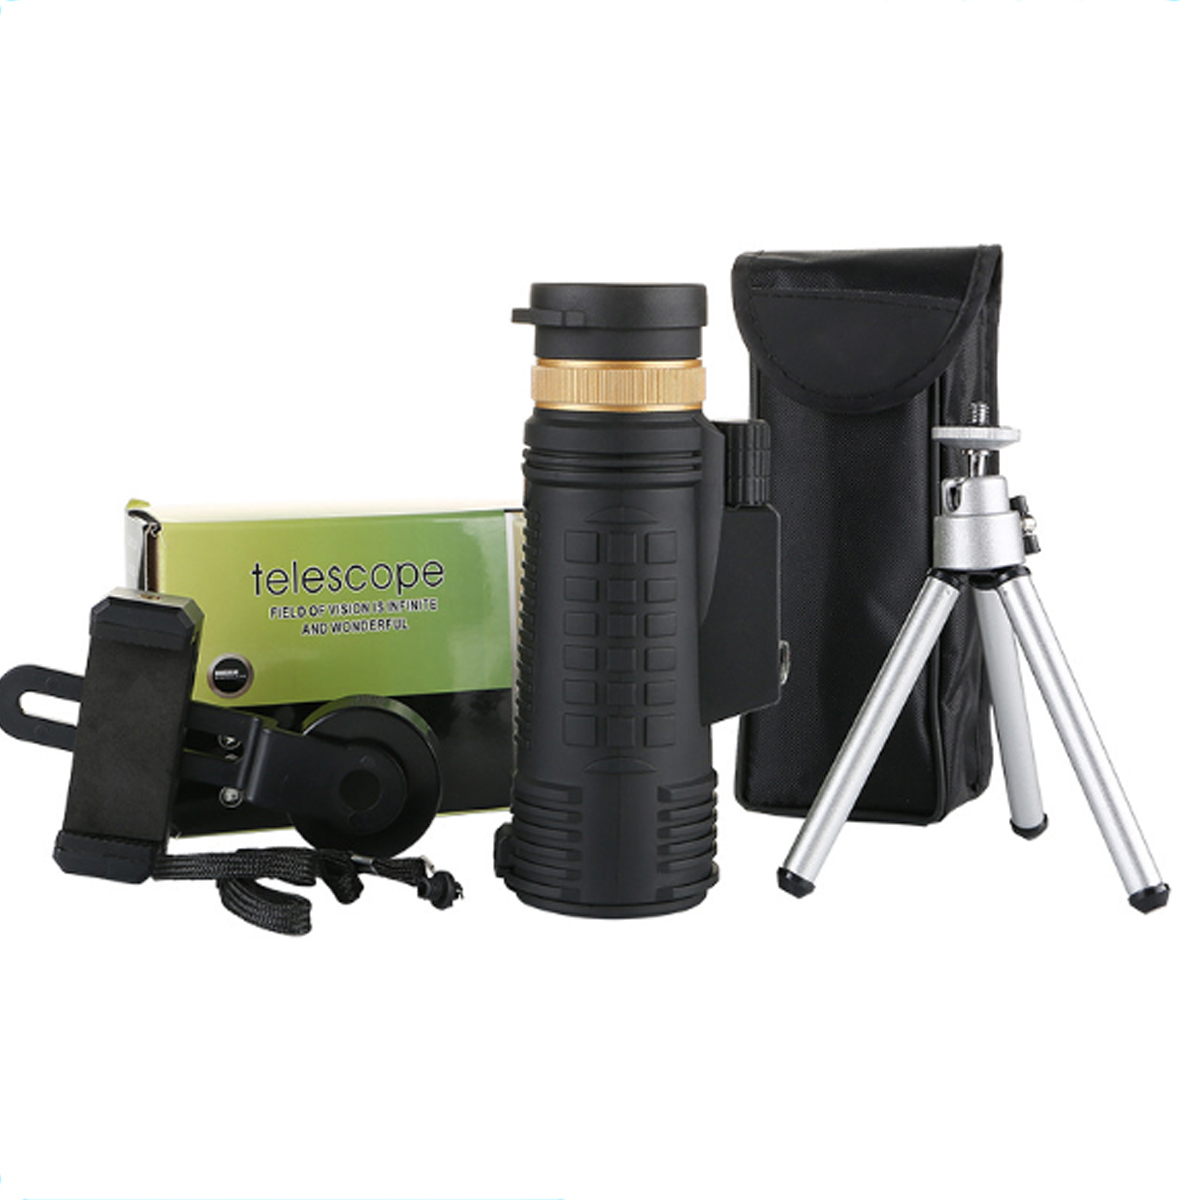 18x62-Outdoor-Compass-Monocular-HD-Optic-Day-Night-Vision-Phone-Telescope-Cmaping-Travel-1412184